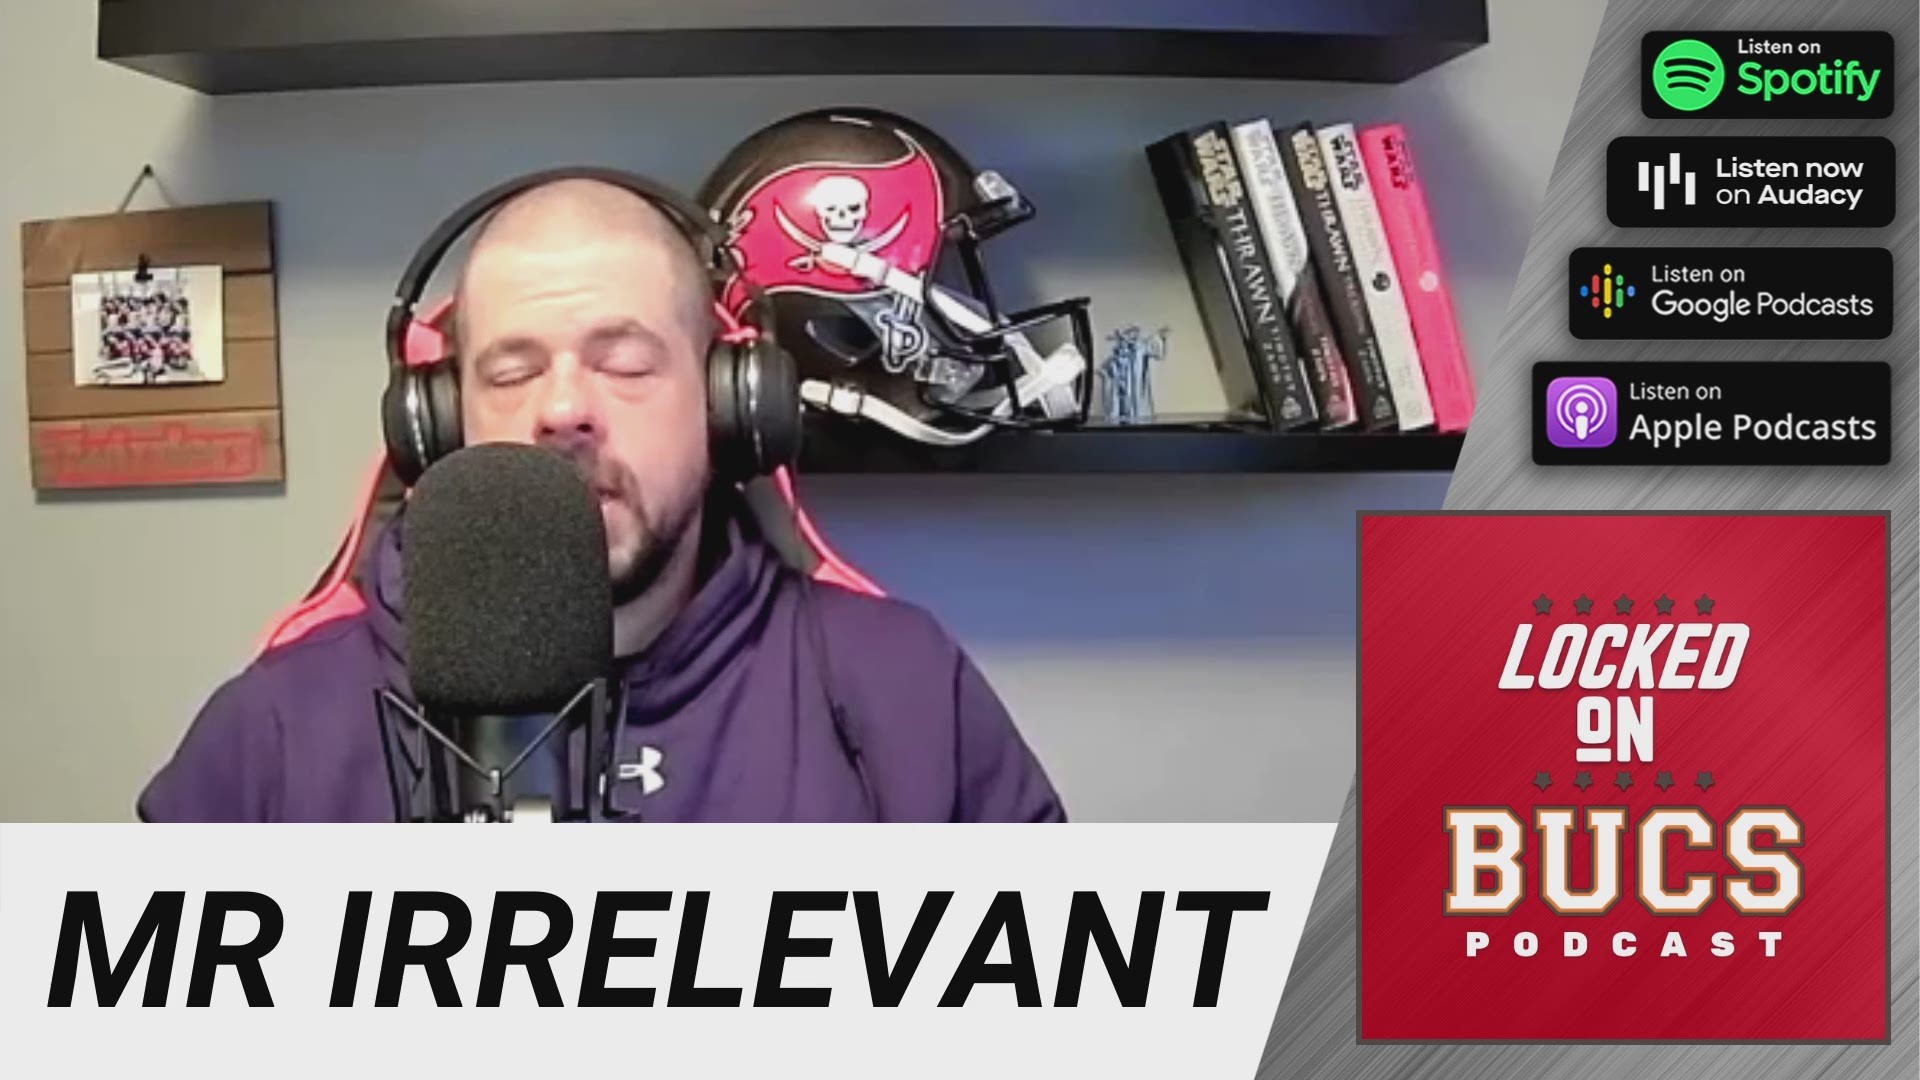 The hosts of the Locked On Bucs podcast react to the team picking Grant Stuard, 'Mr. Irrelevant' in the seventh round of the NFL Draft.